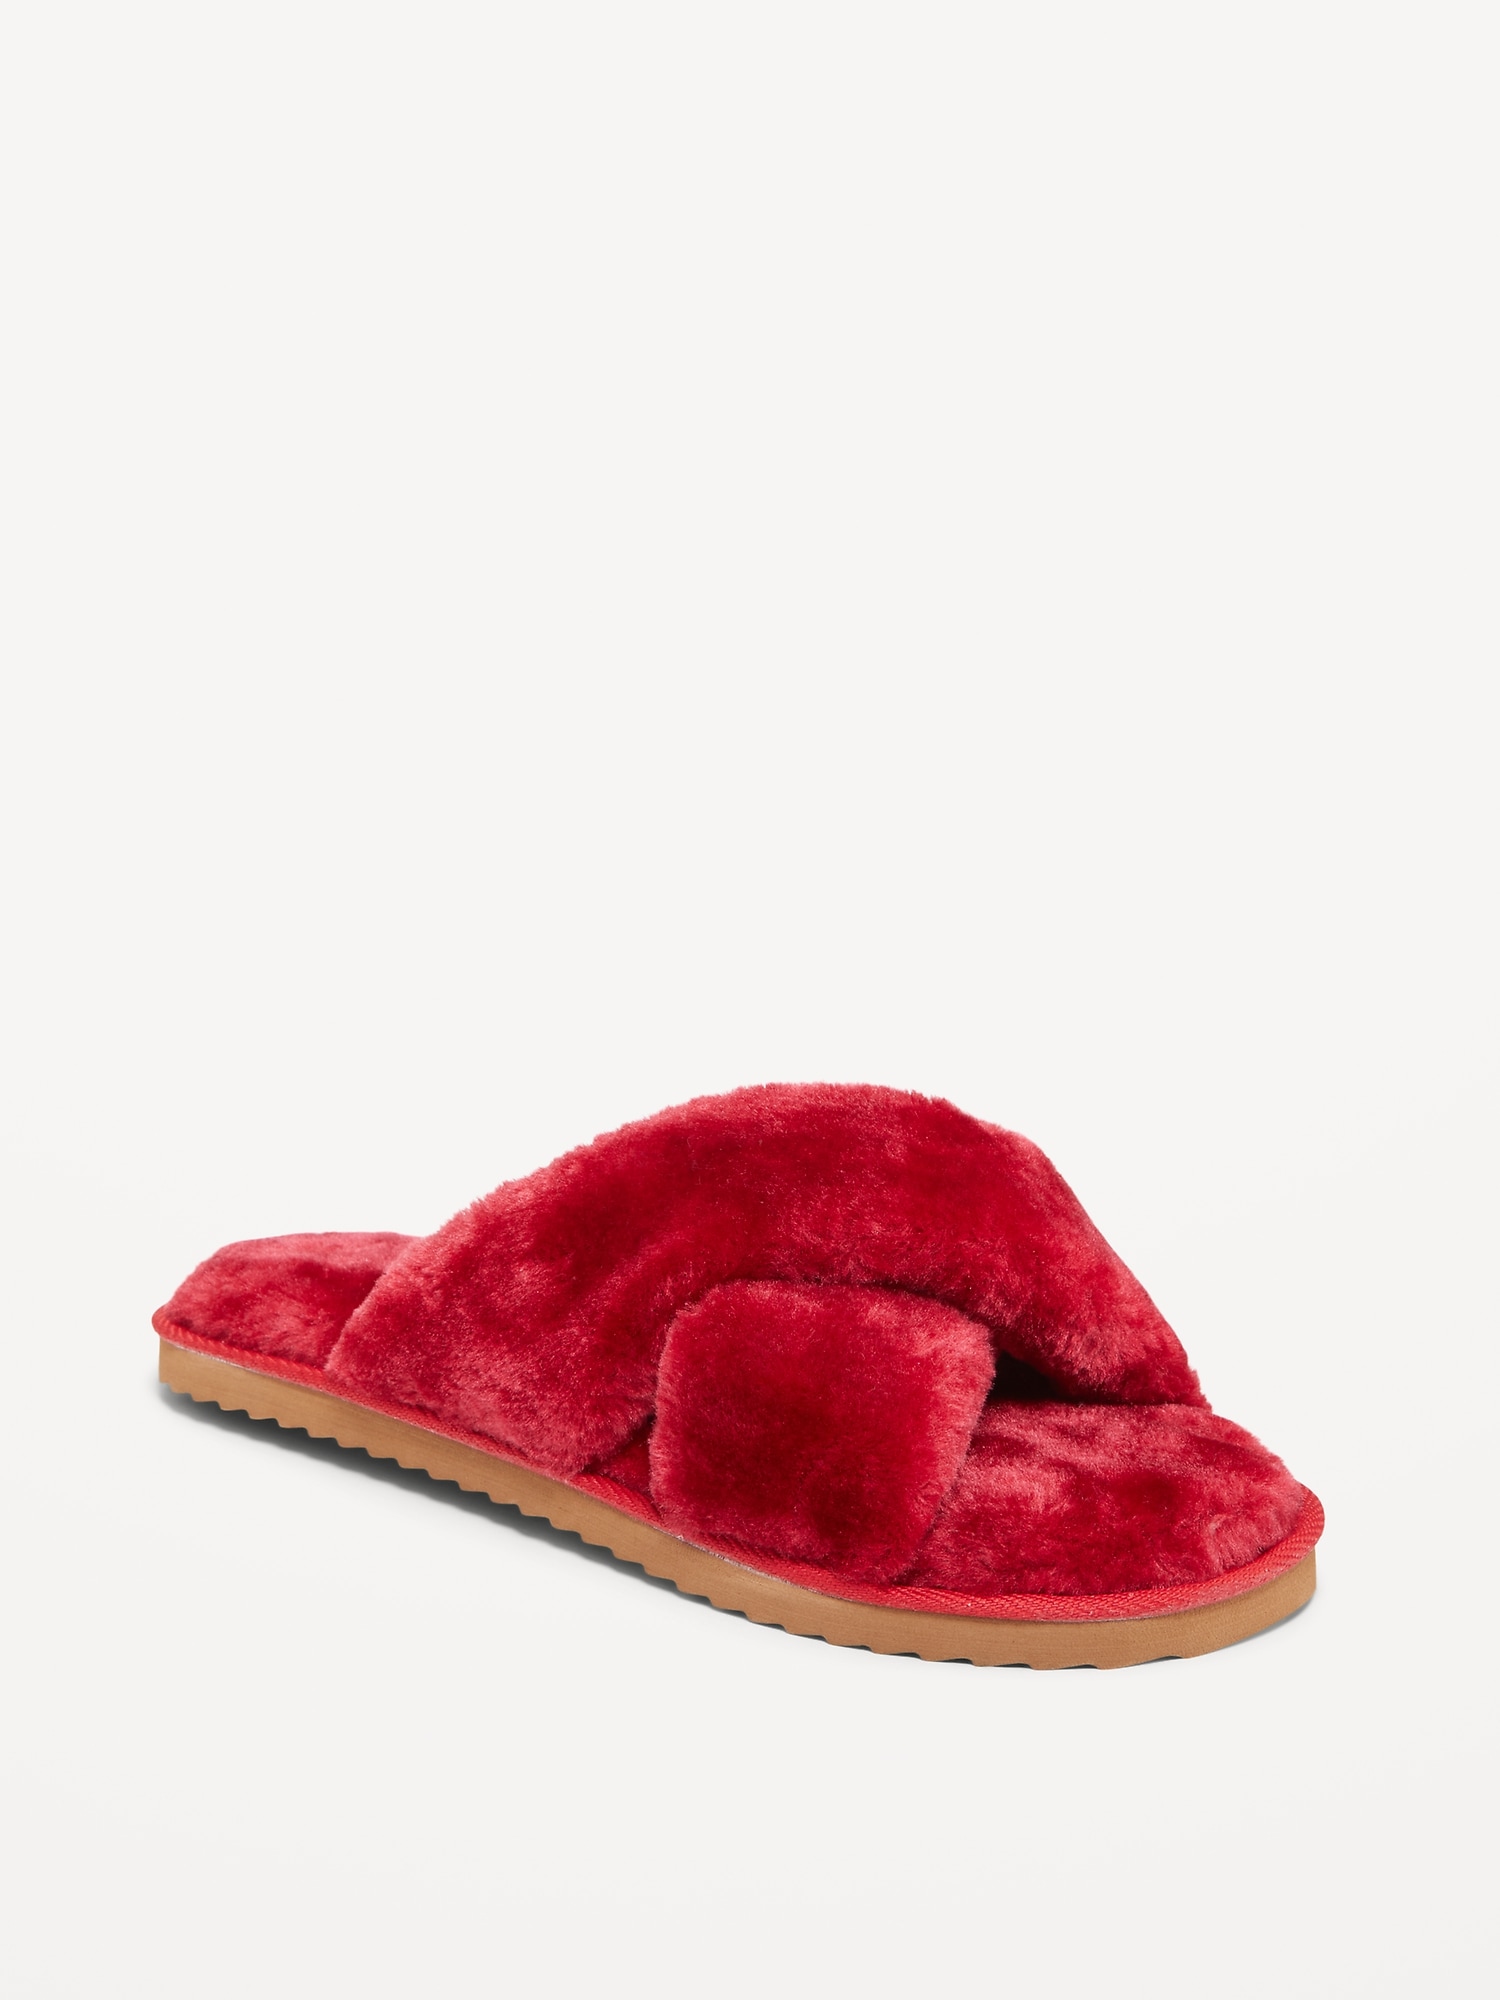 Cozy Faux Fur Slide Slippers | Old Navy